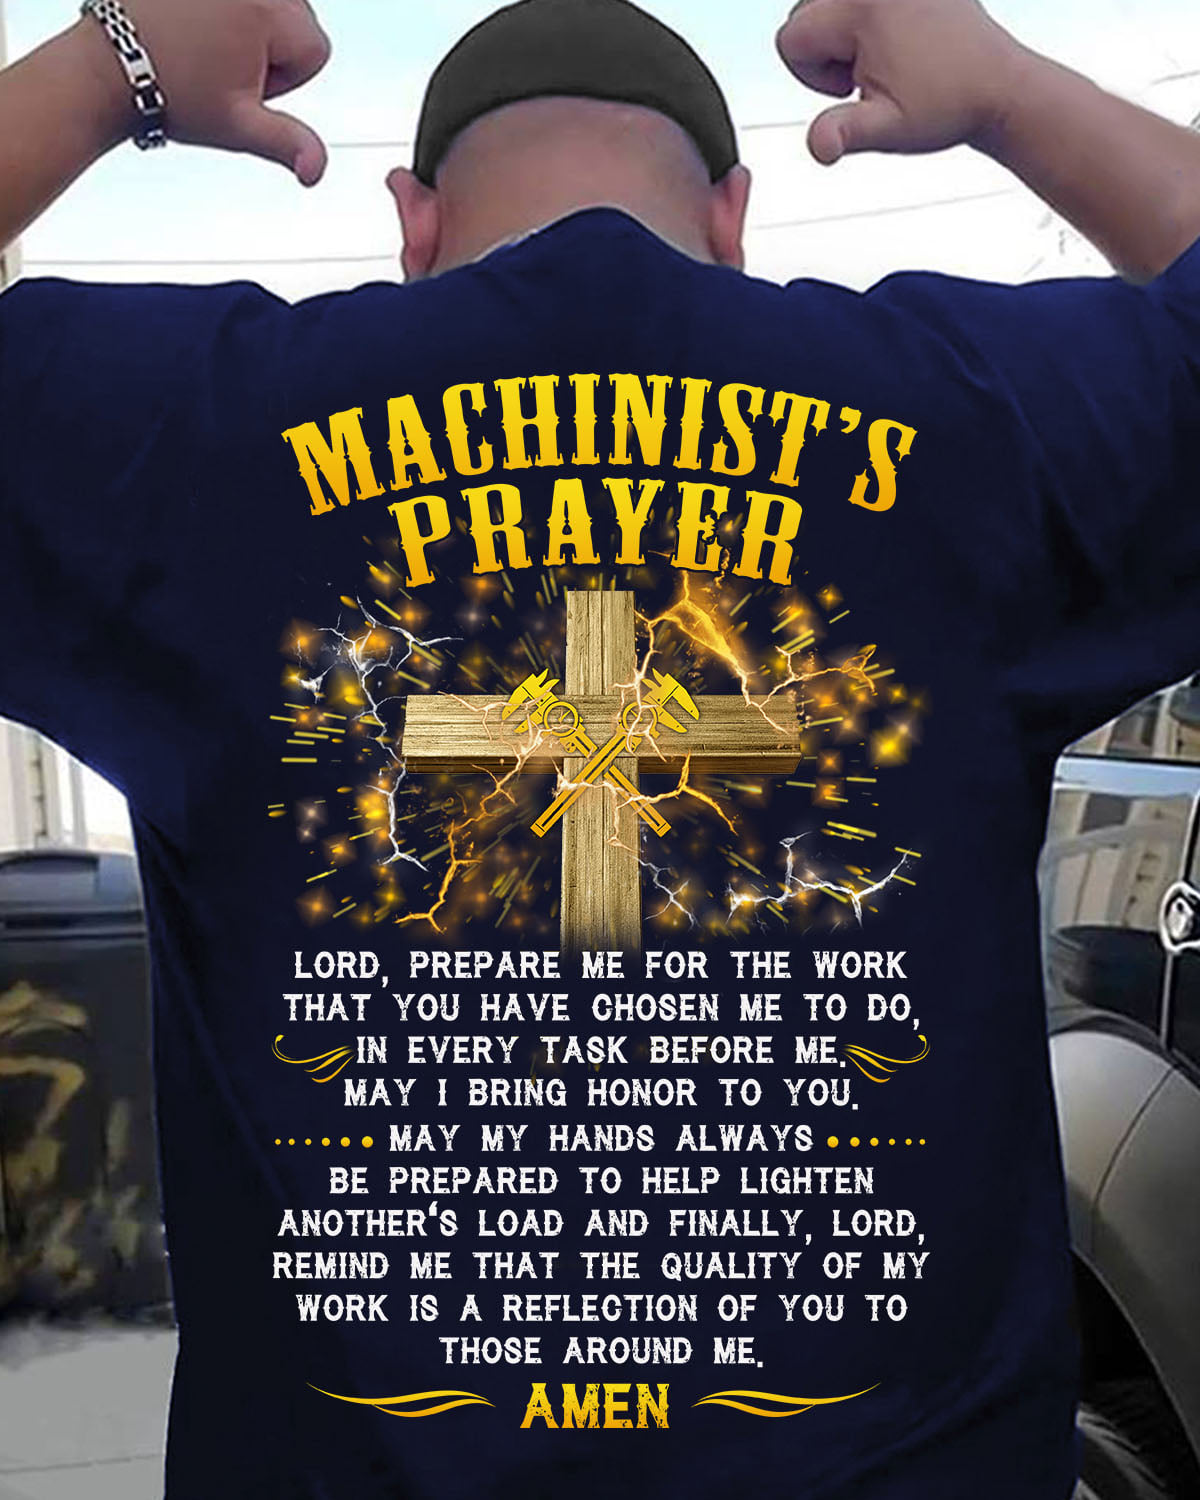 Machinist's prayer - Lord, prepare me for the work that you have chose me to do